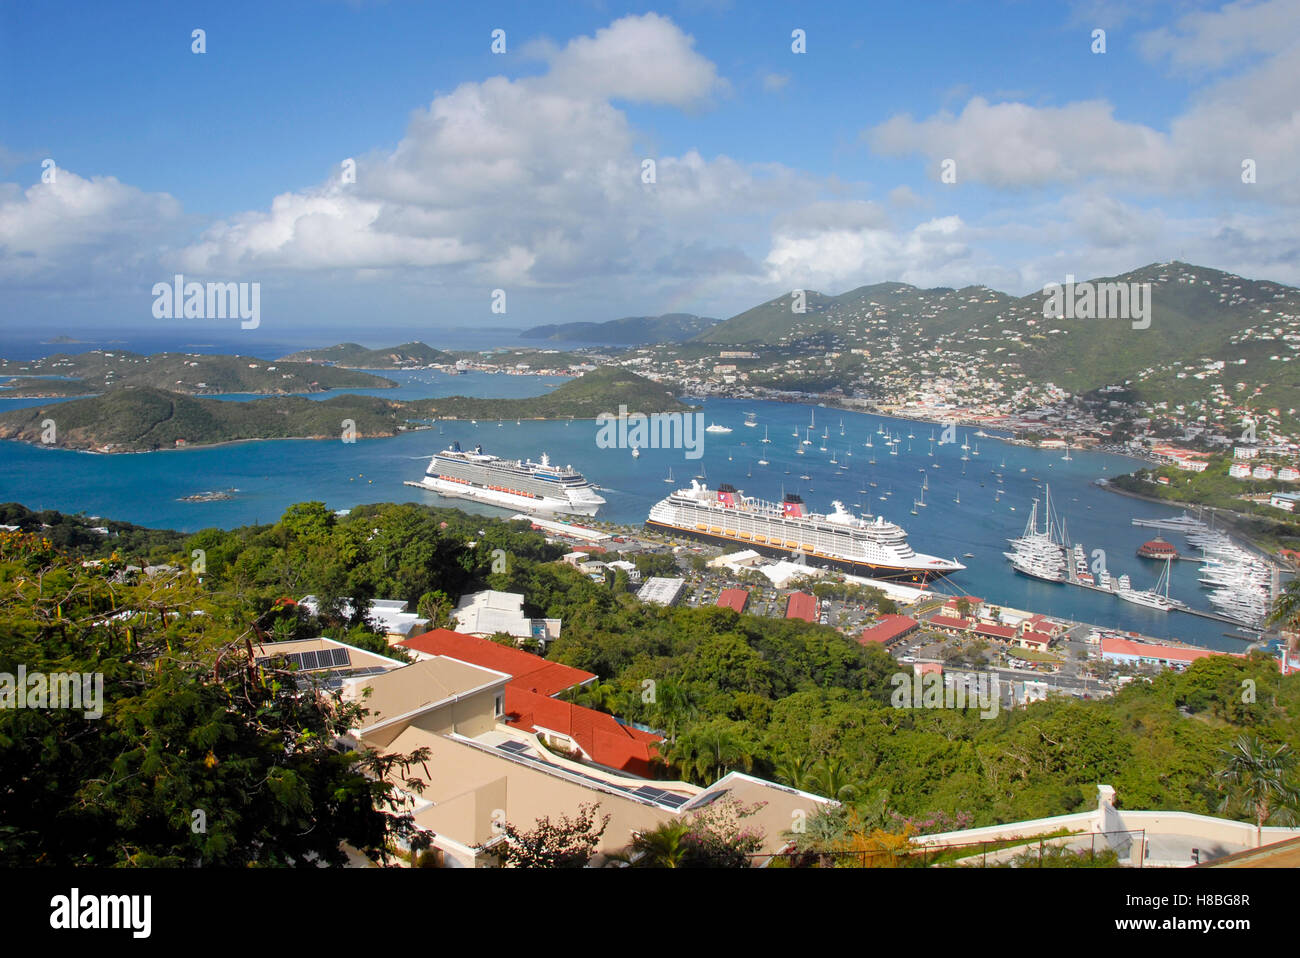 Ships and boats in harbor, seen from Paradise Point, St Thomas, Caribbean Stock Photo